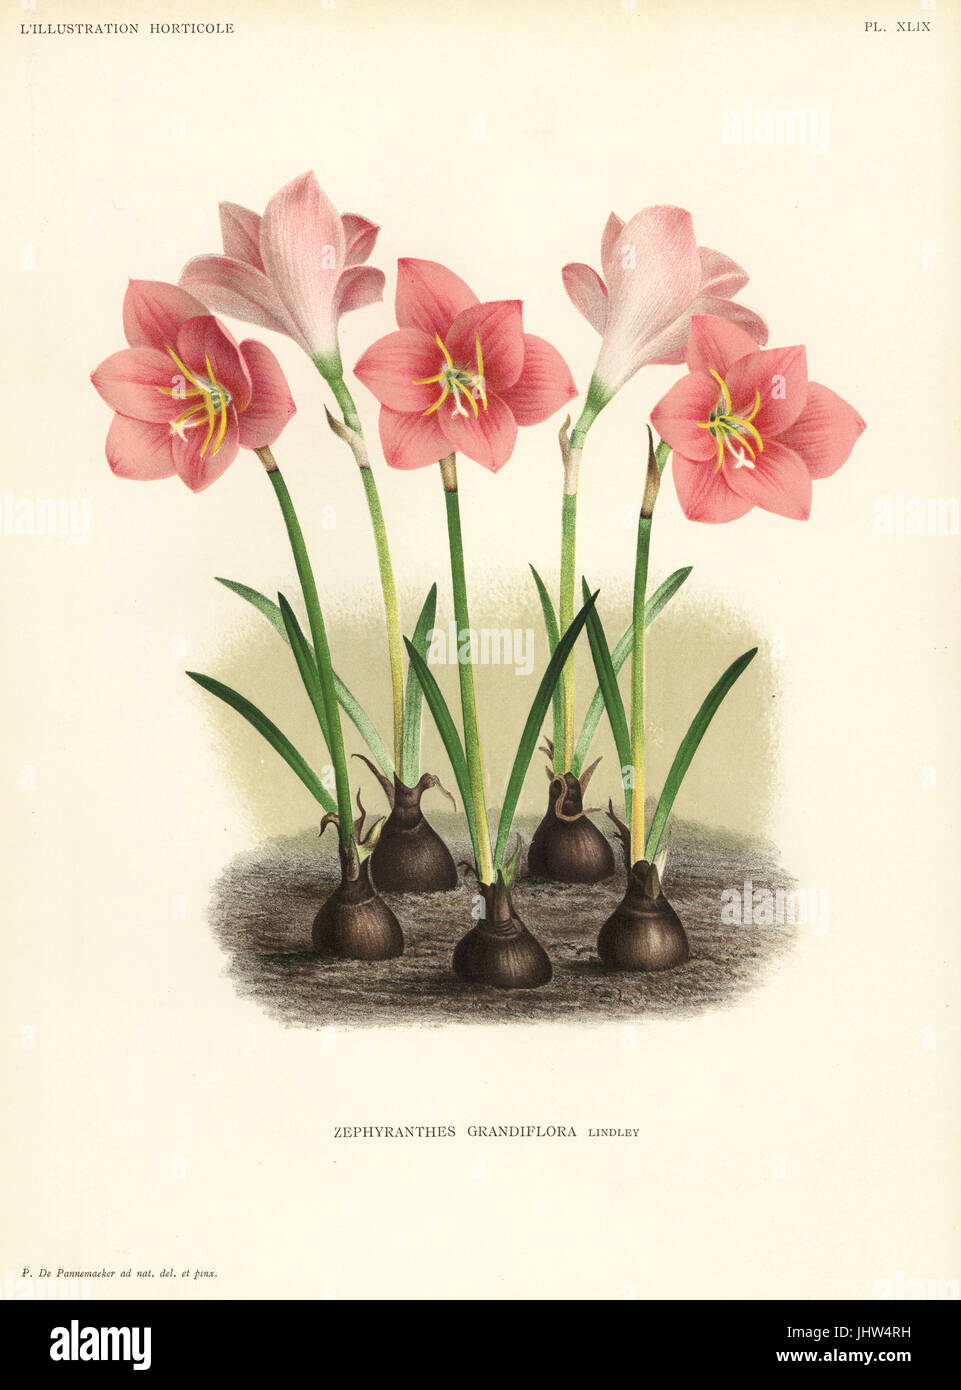 Zephyranthes minuta (Zephyranthes grandiflora). Drawn and chromolithographed by Pieter de Pannemaeker from Jean Linden's l'Illustration Horticole, Brussels, 1888. Stock Photo